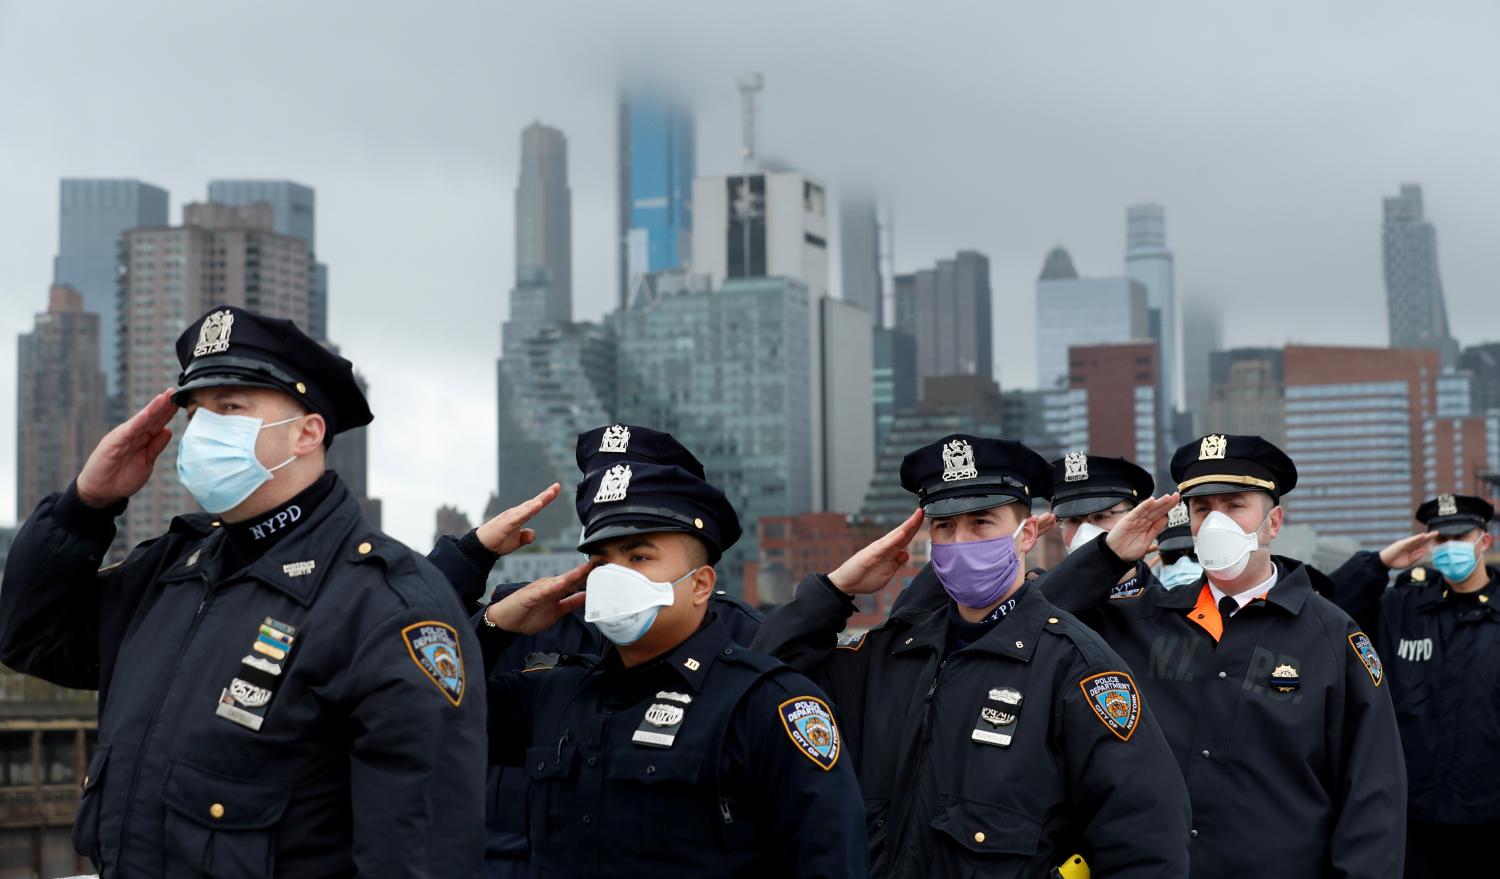 Police officers from the NYPD salute as the U.S. Navy hospital ship USNS Comfort departs Pier 90 in Manhattan under heavy fog to return to its home port of Norfolk, Virginia, after treating patients during the outbreak of the coronavirus (COVID-19) in New York City New York, U.S., April 30, 2020. REUTERS/Lucas Jackson     TPX IMAGES OF THE DAY